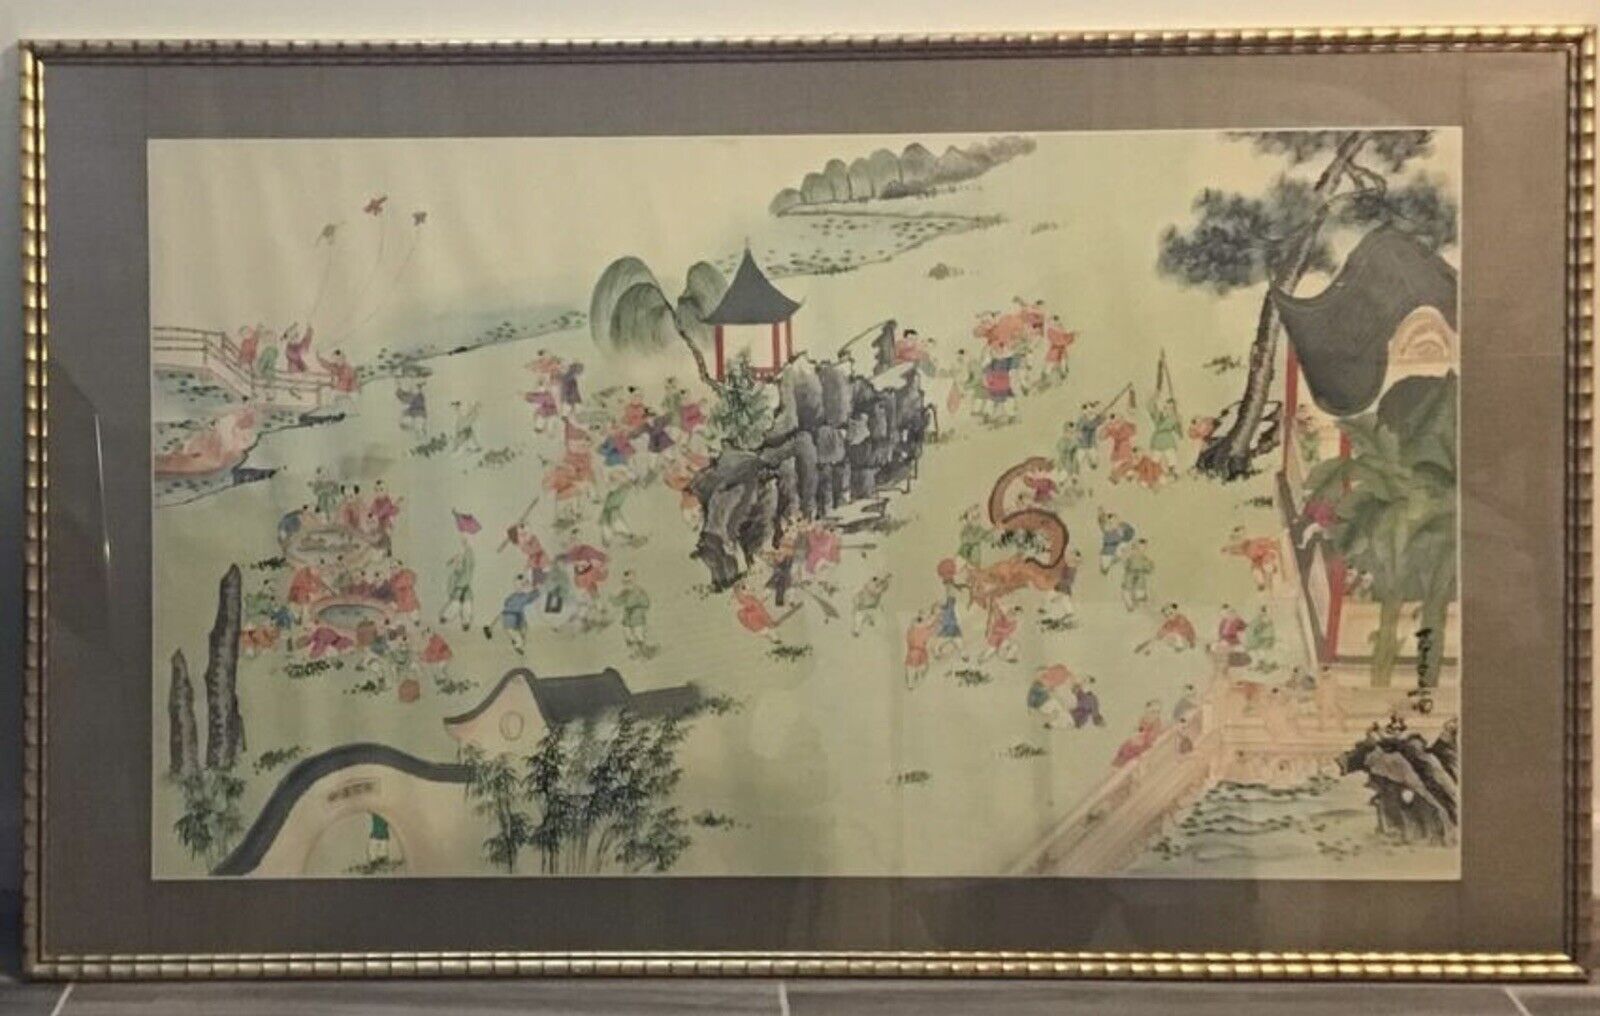 Large Vintage Original Hand Painted Chinese Art on Fabric, 32” x 53”